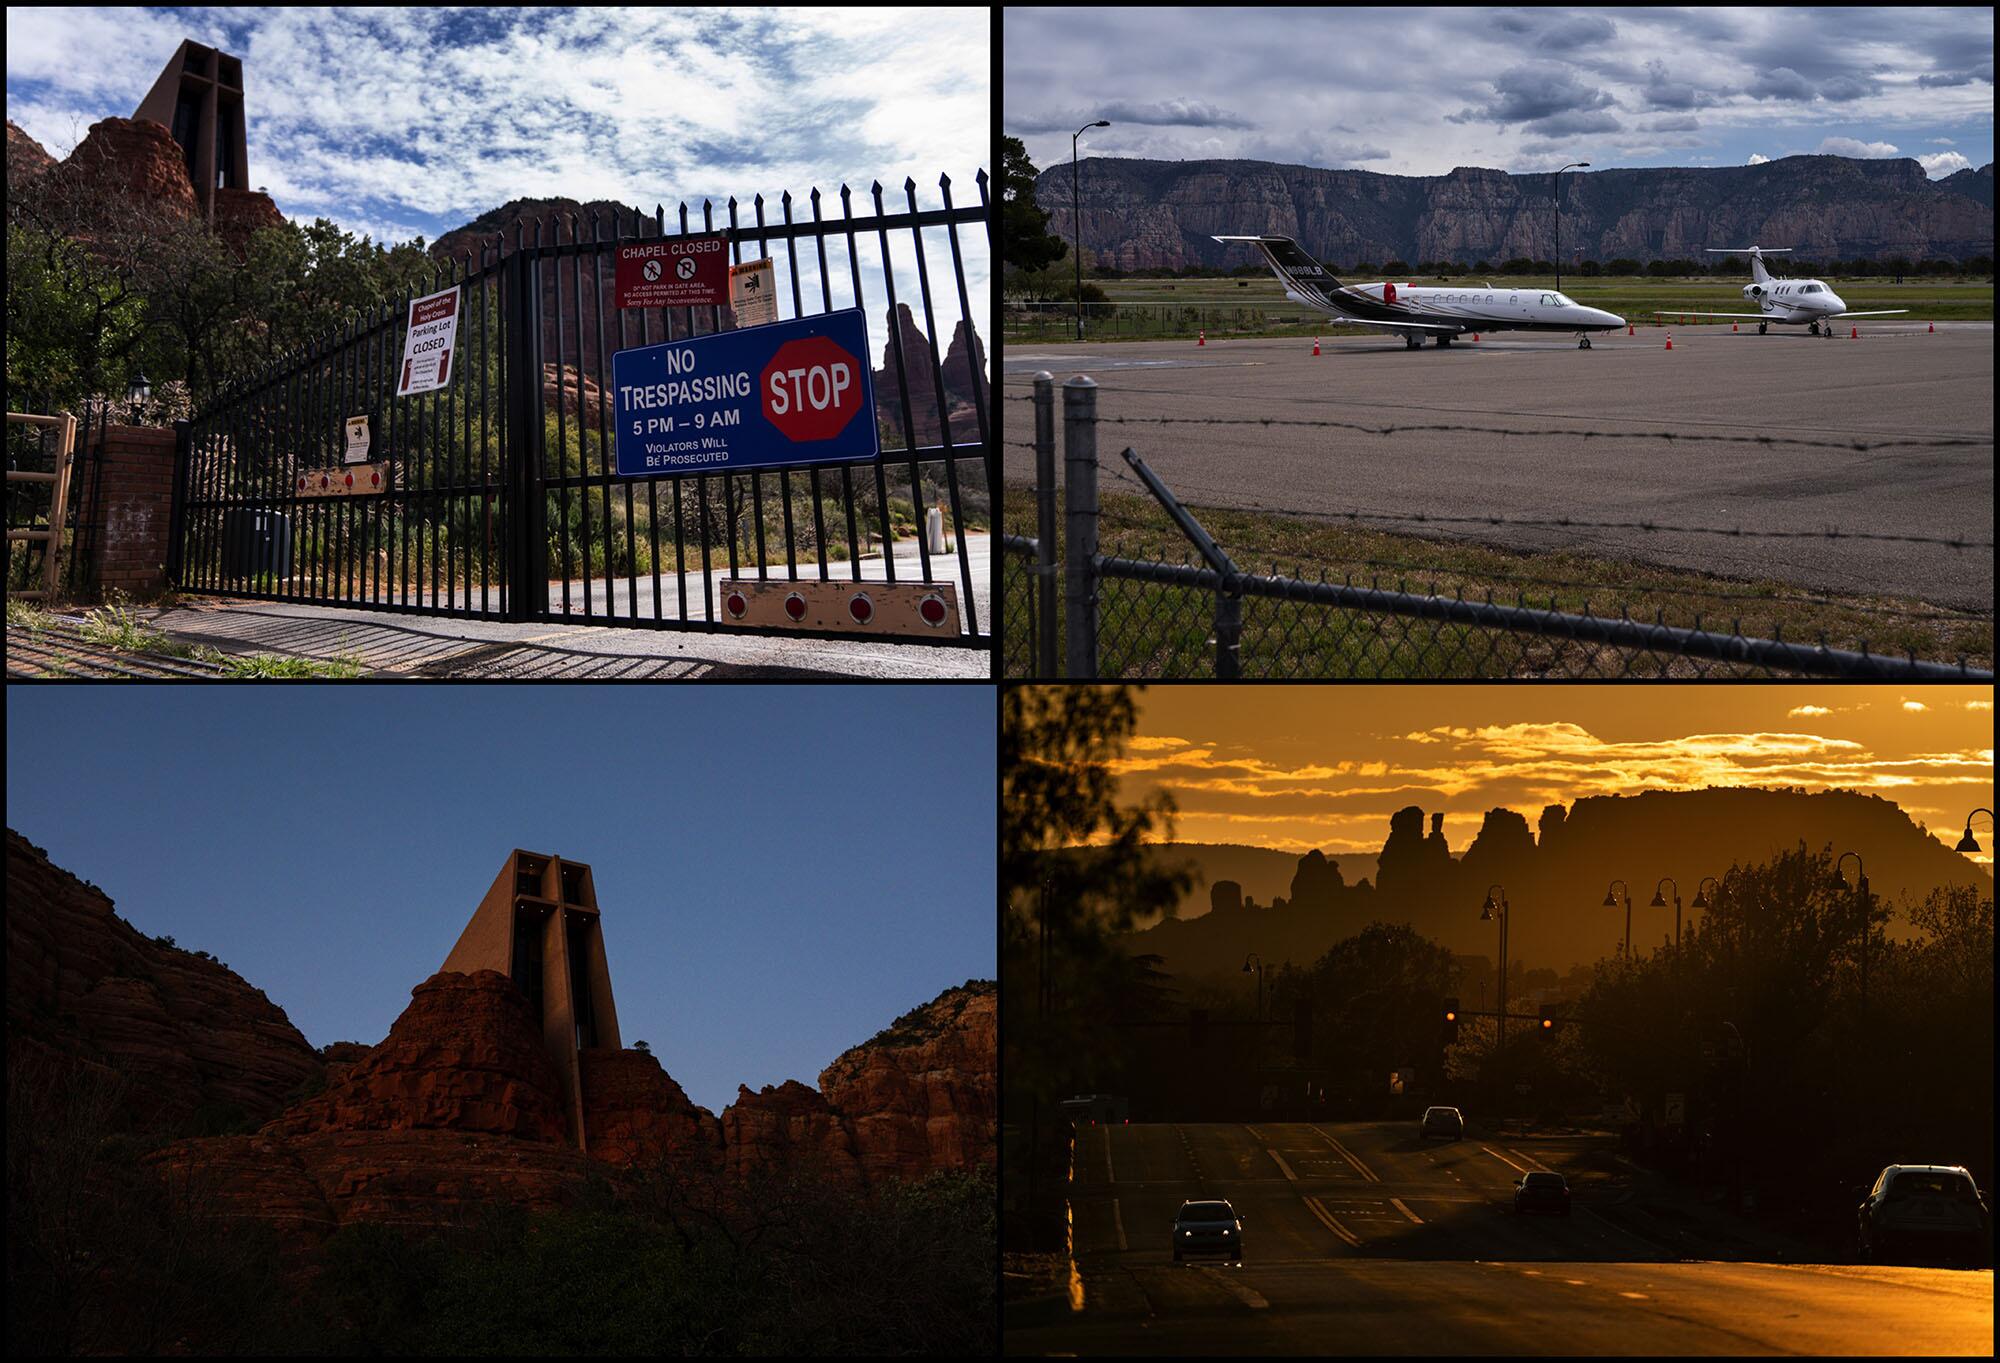 Clockwise from upper right: Two private jets are parked at the Sedona Airport, which is atop a mesa overlooking the city; the sun sets over Arizona State Route 89A cutting through Sedona; Chapel of the Holy Cross; a gate in front of Chapel of the Holy Cross.